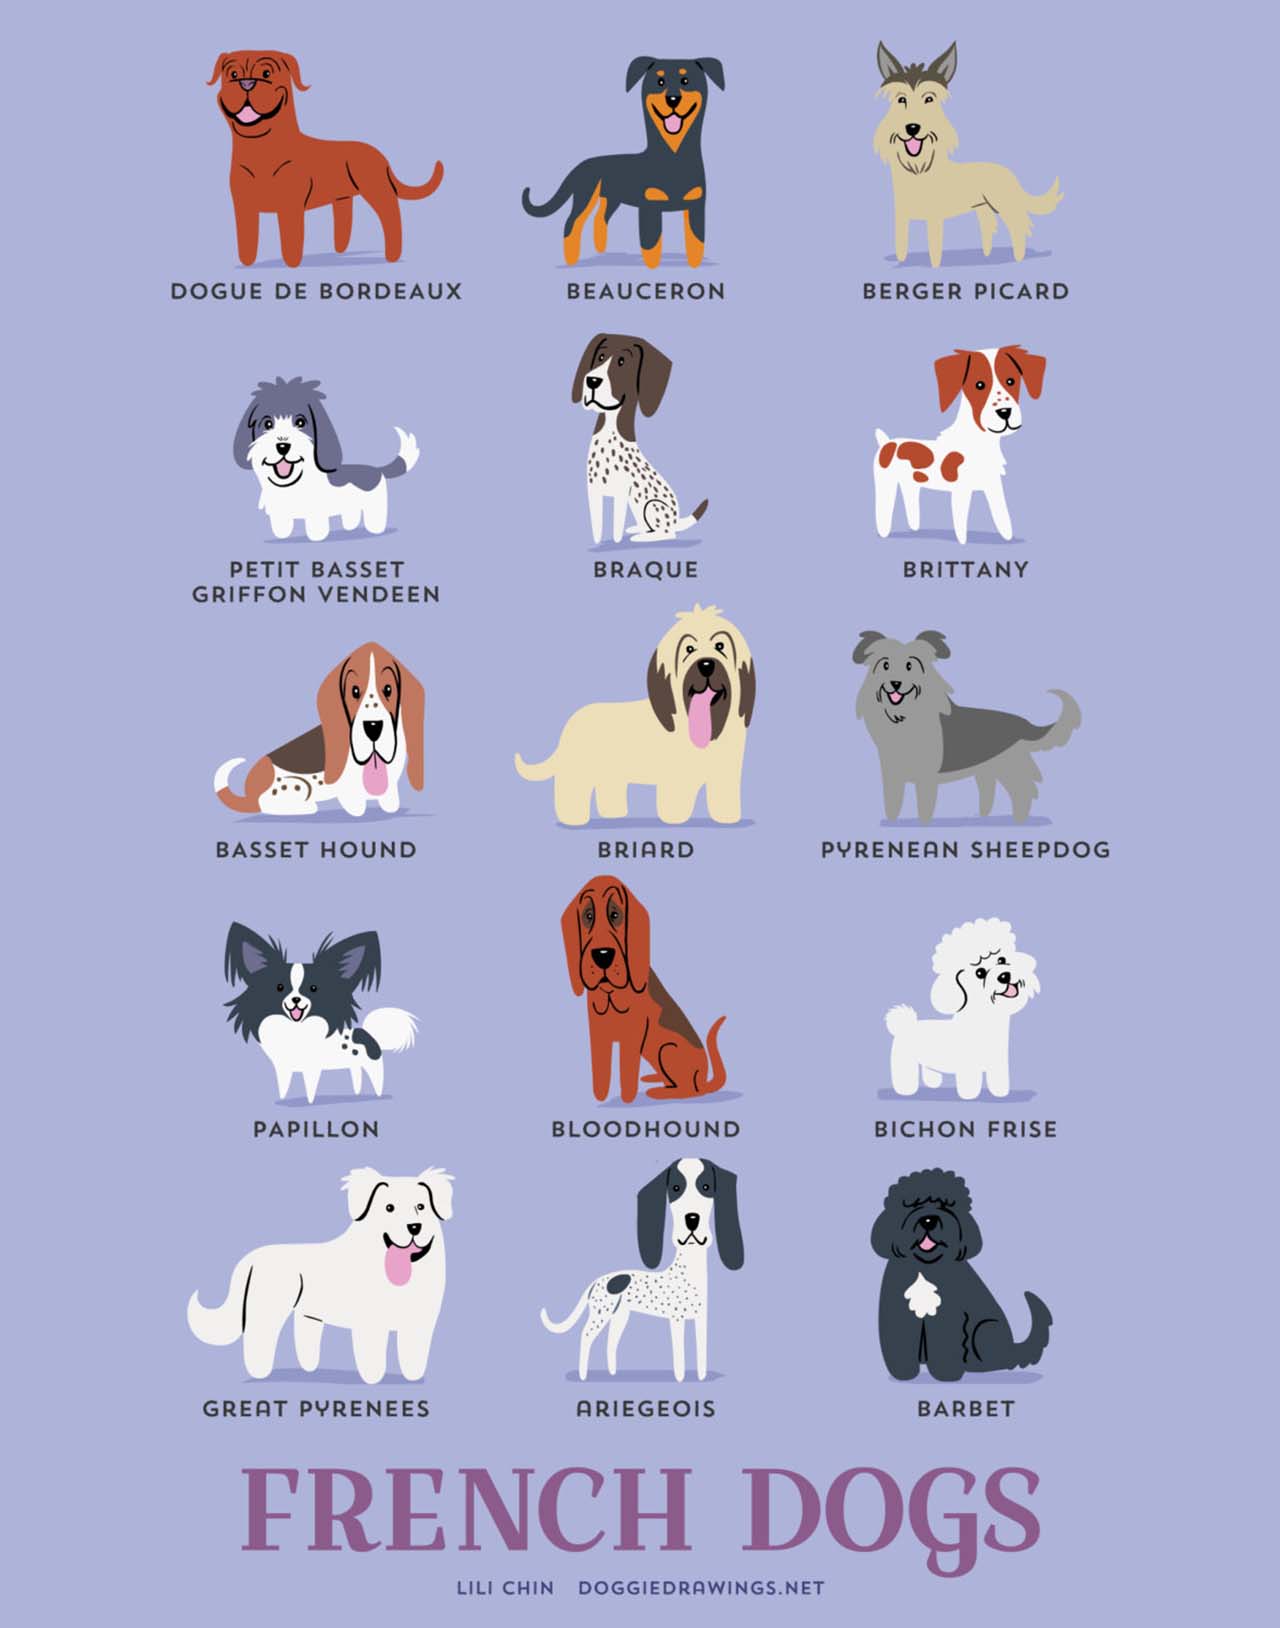 Origin Of Dogs: Cute Illustration By Lili Chin Show Where Dog Breeds Originating From #2: French Dogs